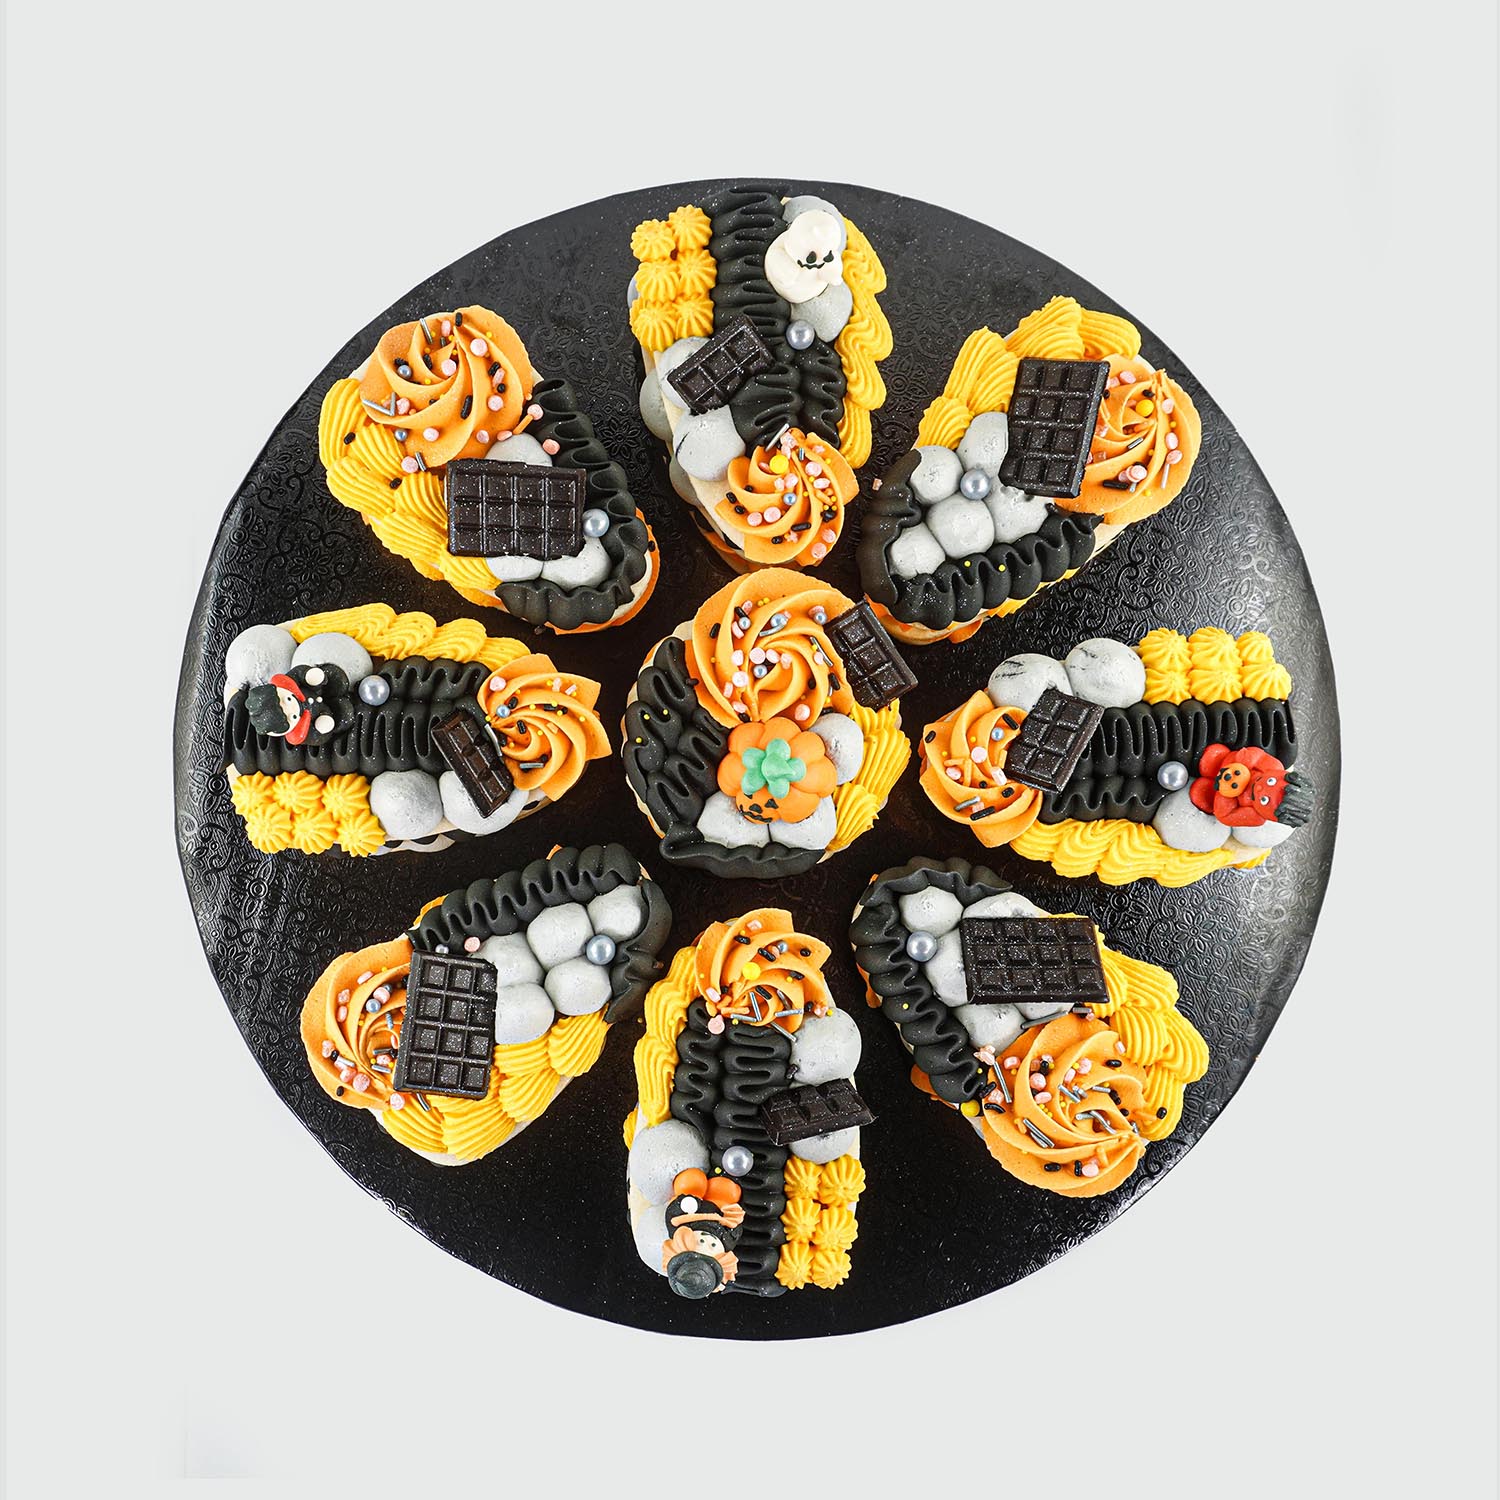 Halloween Layered Buttercream Cookie Pizza iwth yellow, pumpkin, slate and black piped buttercream with chocolate bars,sprinkles and halloween theme sugar layons